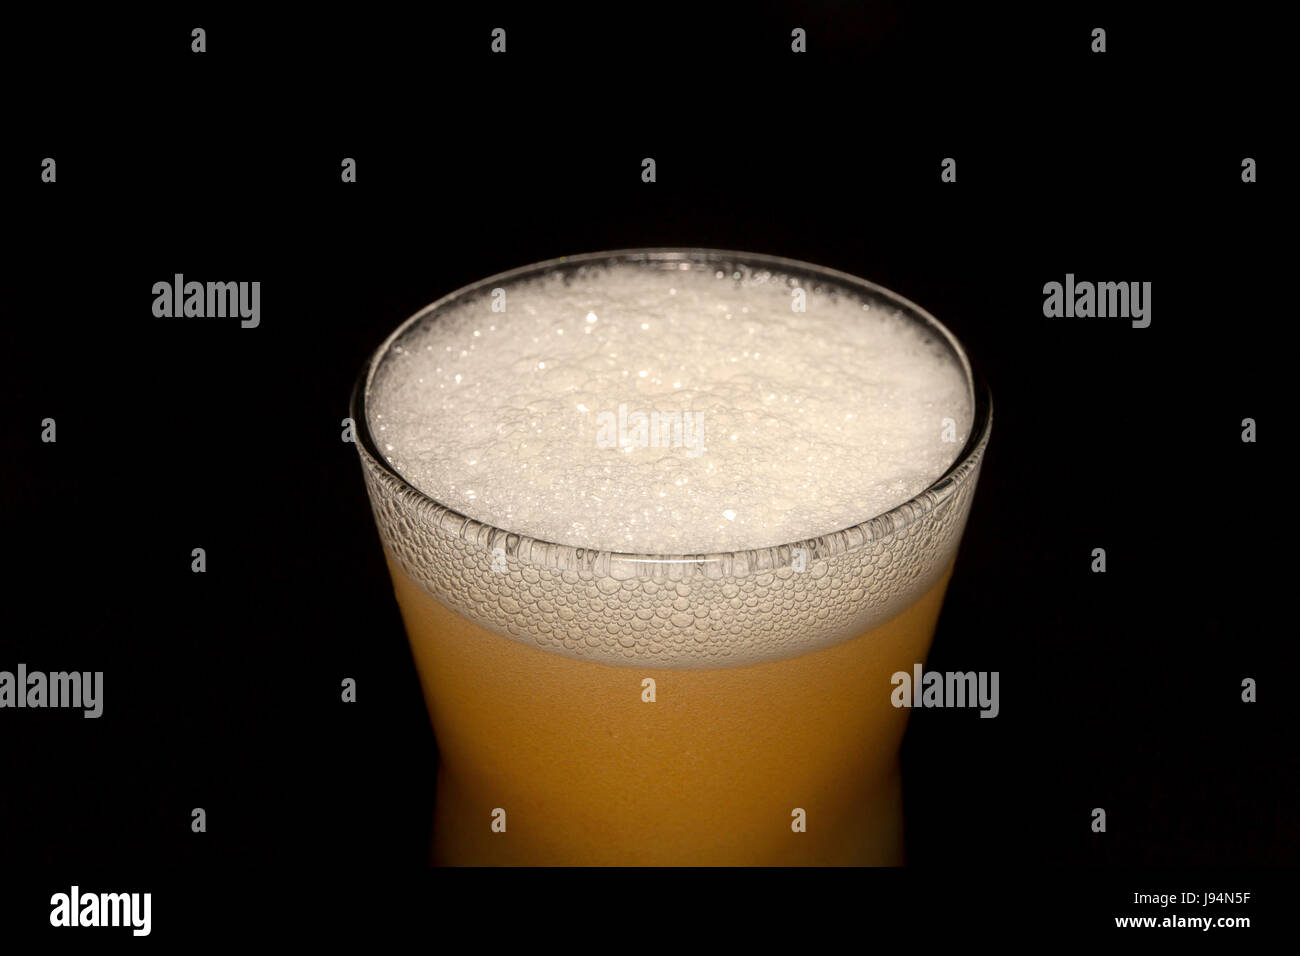 Beer in glass isolated on black background. Stock Photo